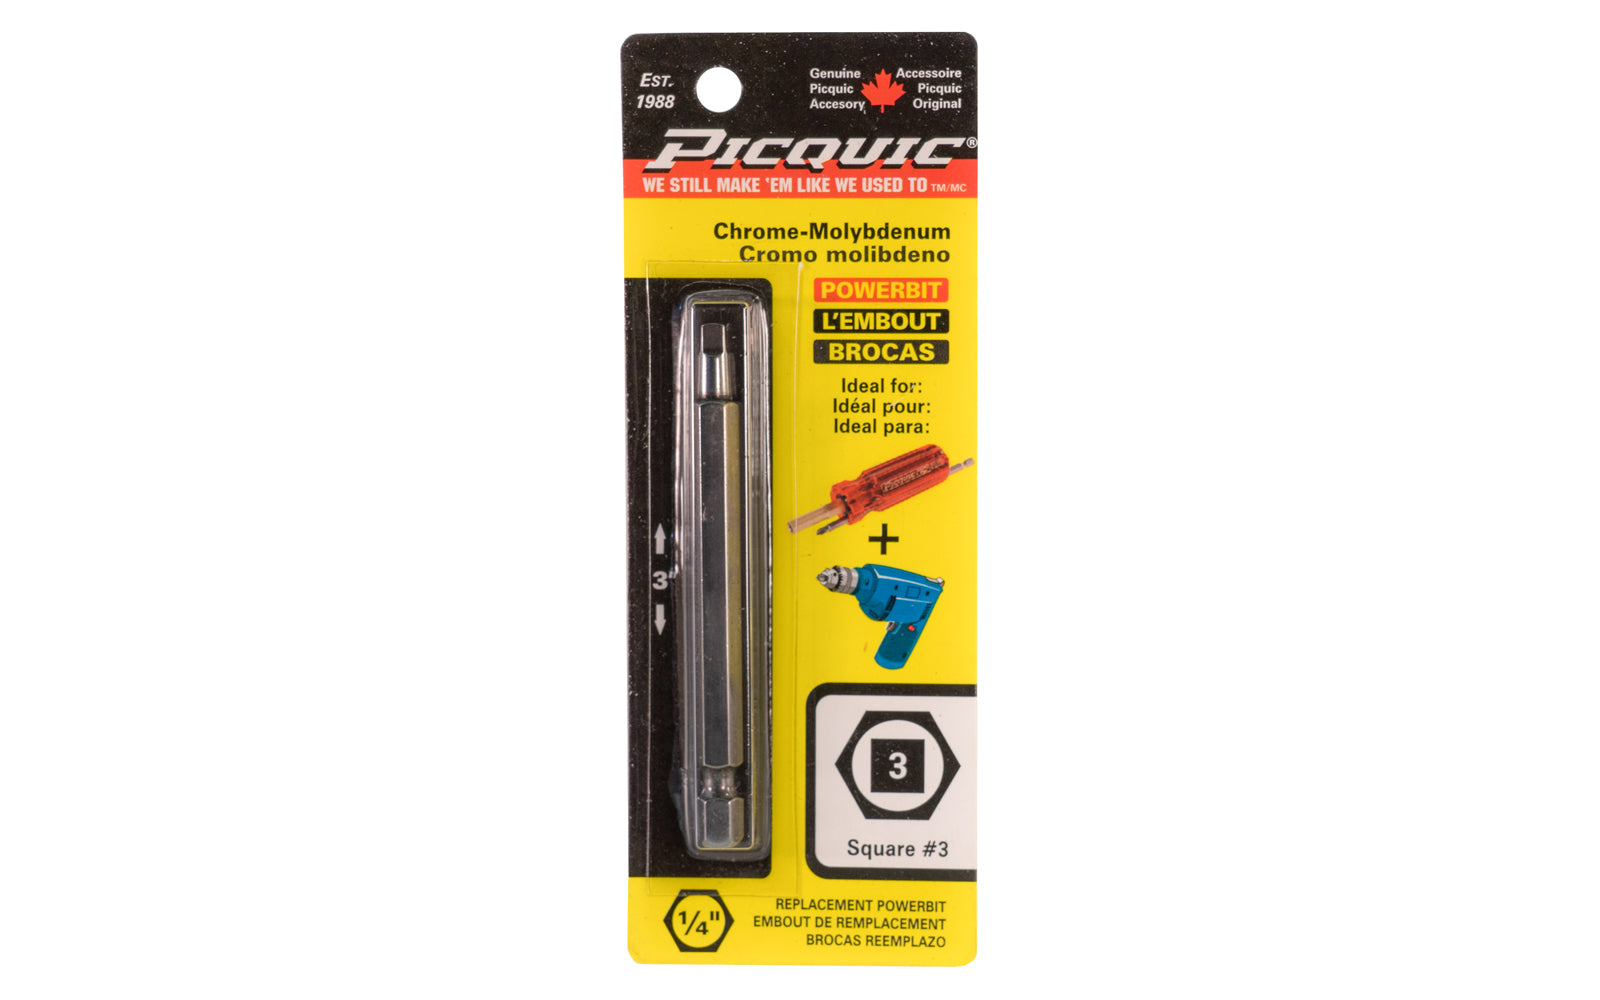 Picquic 3" length powerbit - #3 Robertson Square Drive Bit. 1/4" hex shank power bits ideal for use in drills & impact drivers. Model 88013.